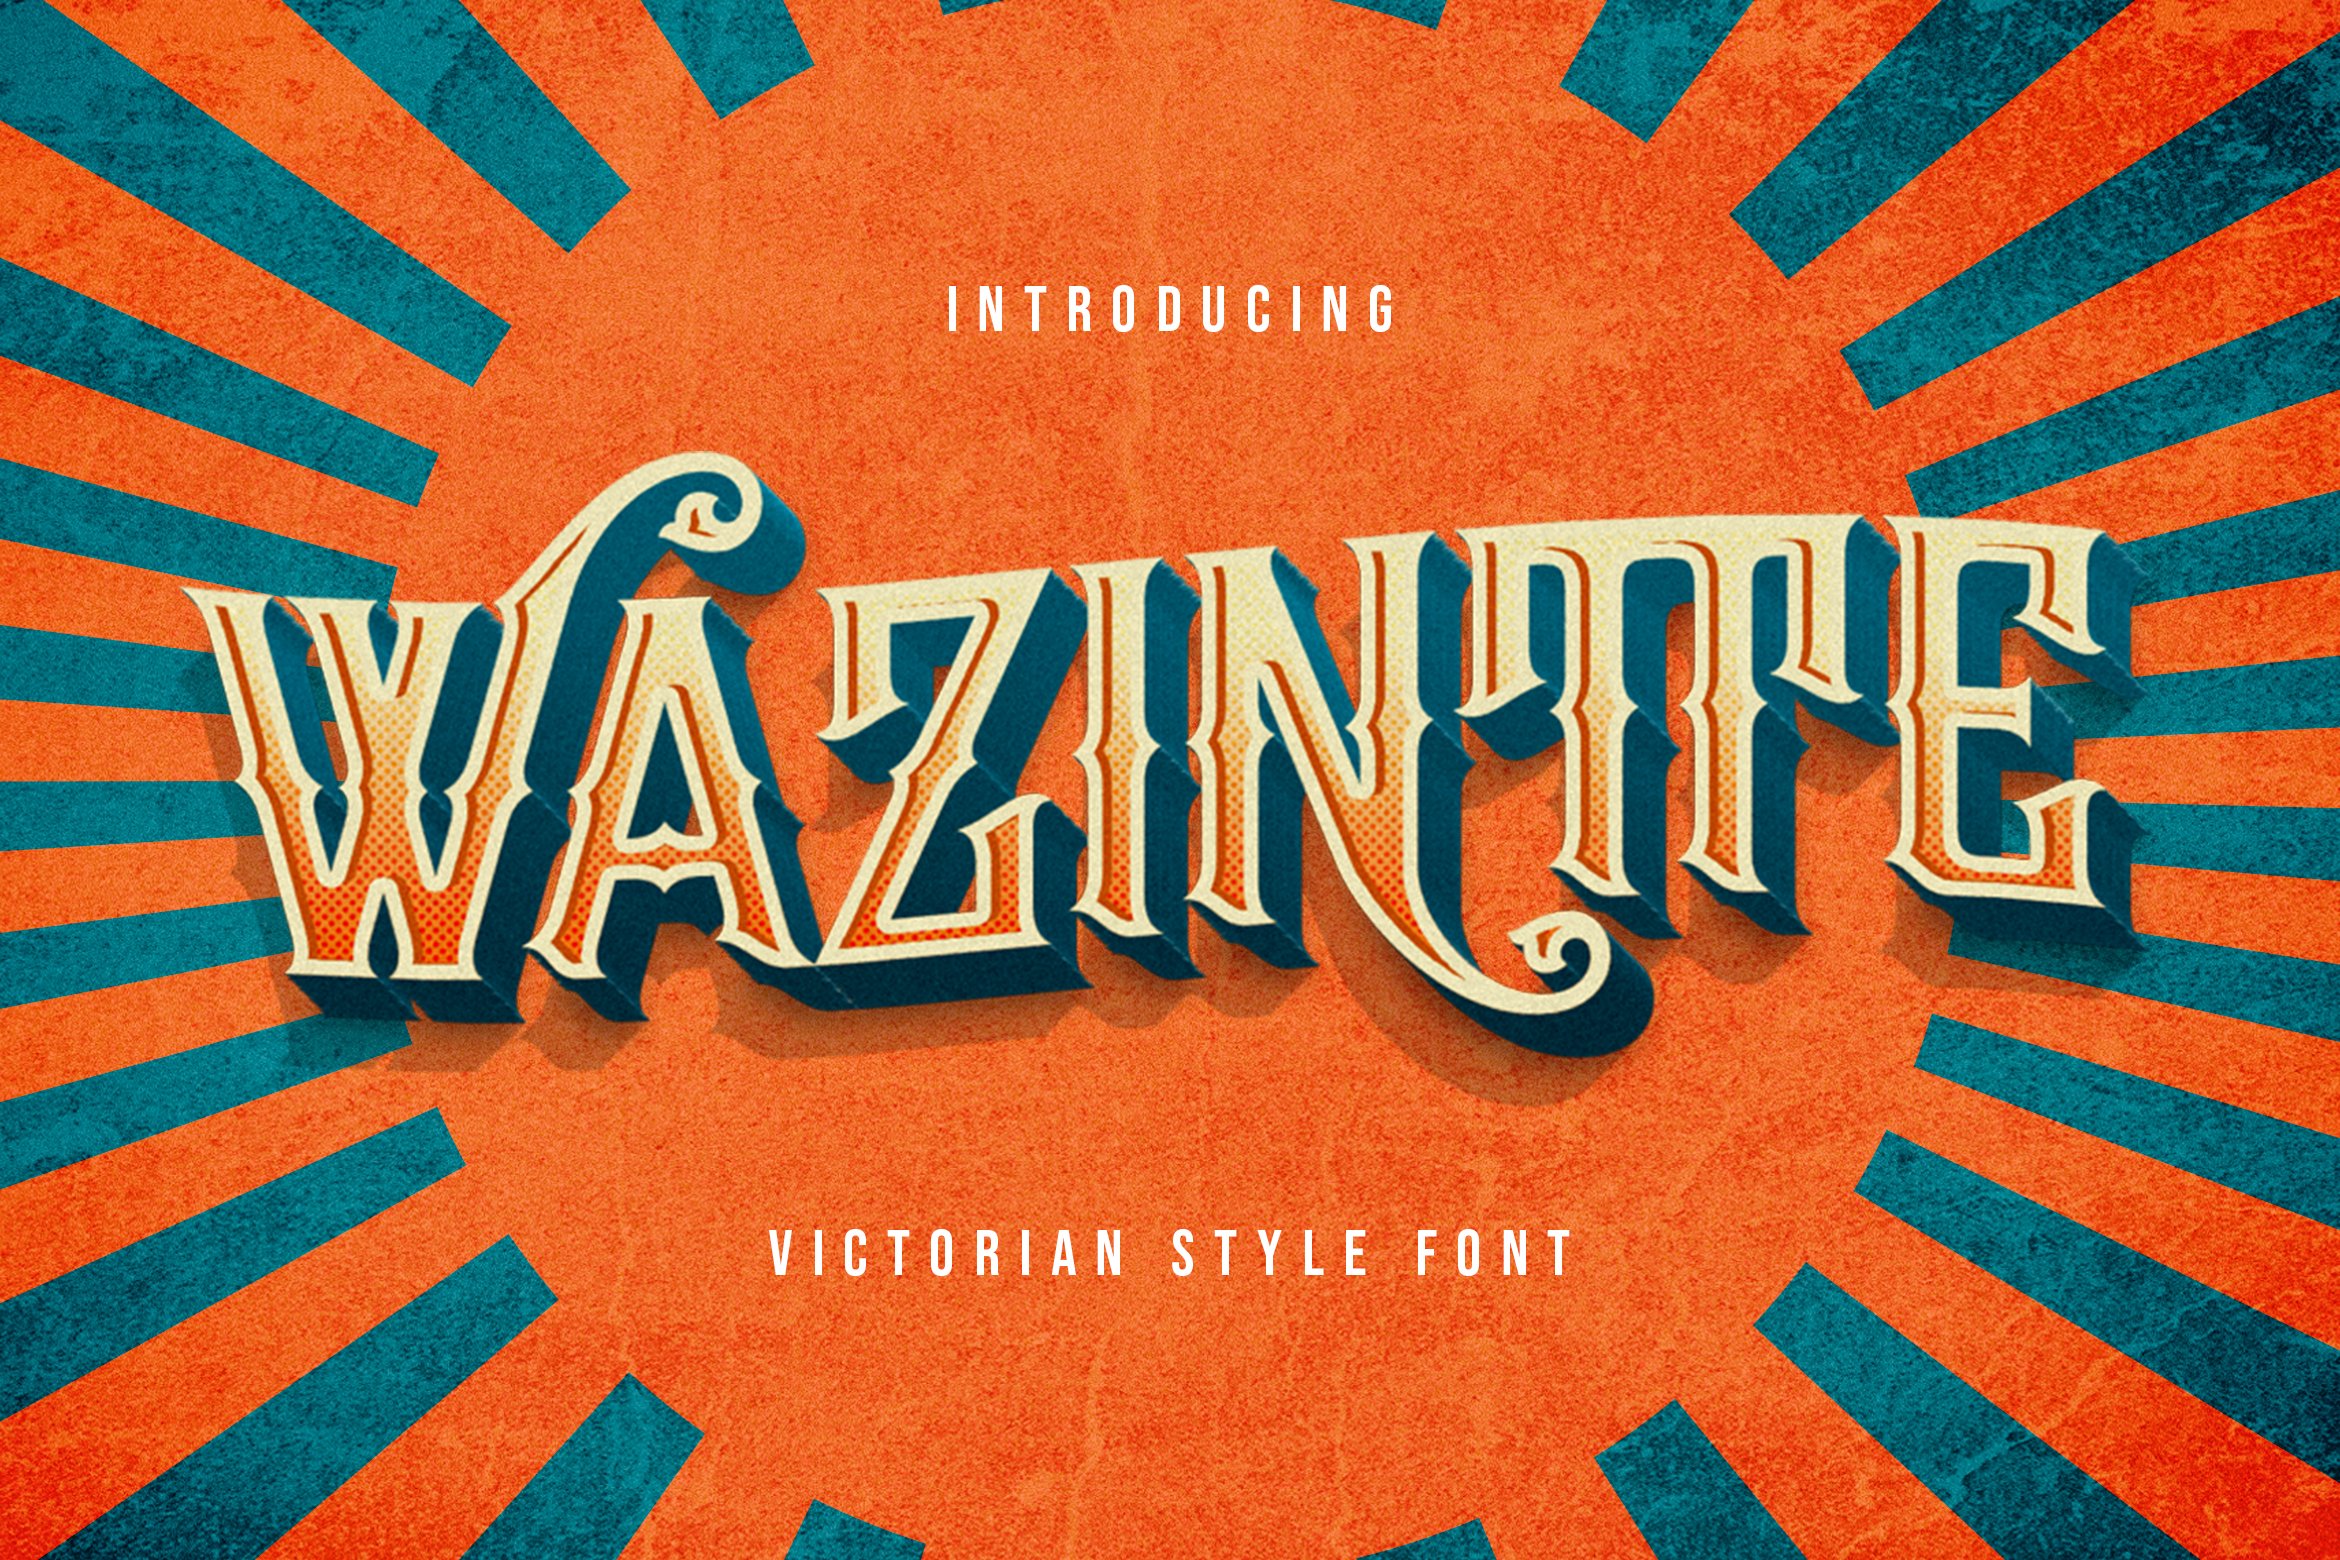 Wazintte - Victorian Style Font cover image.